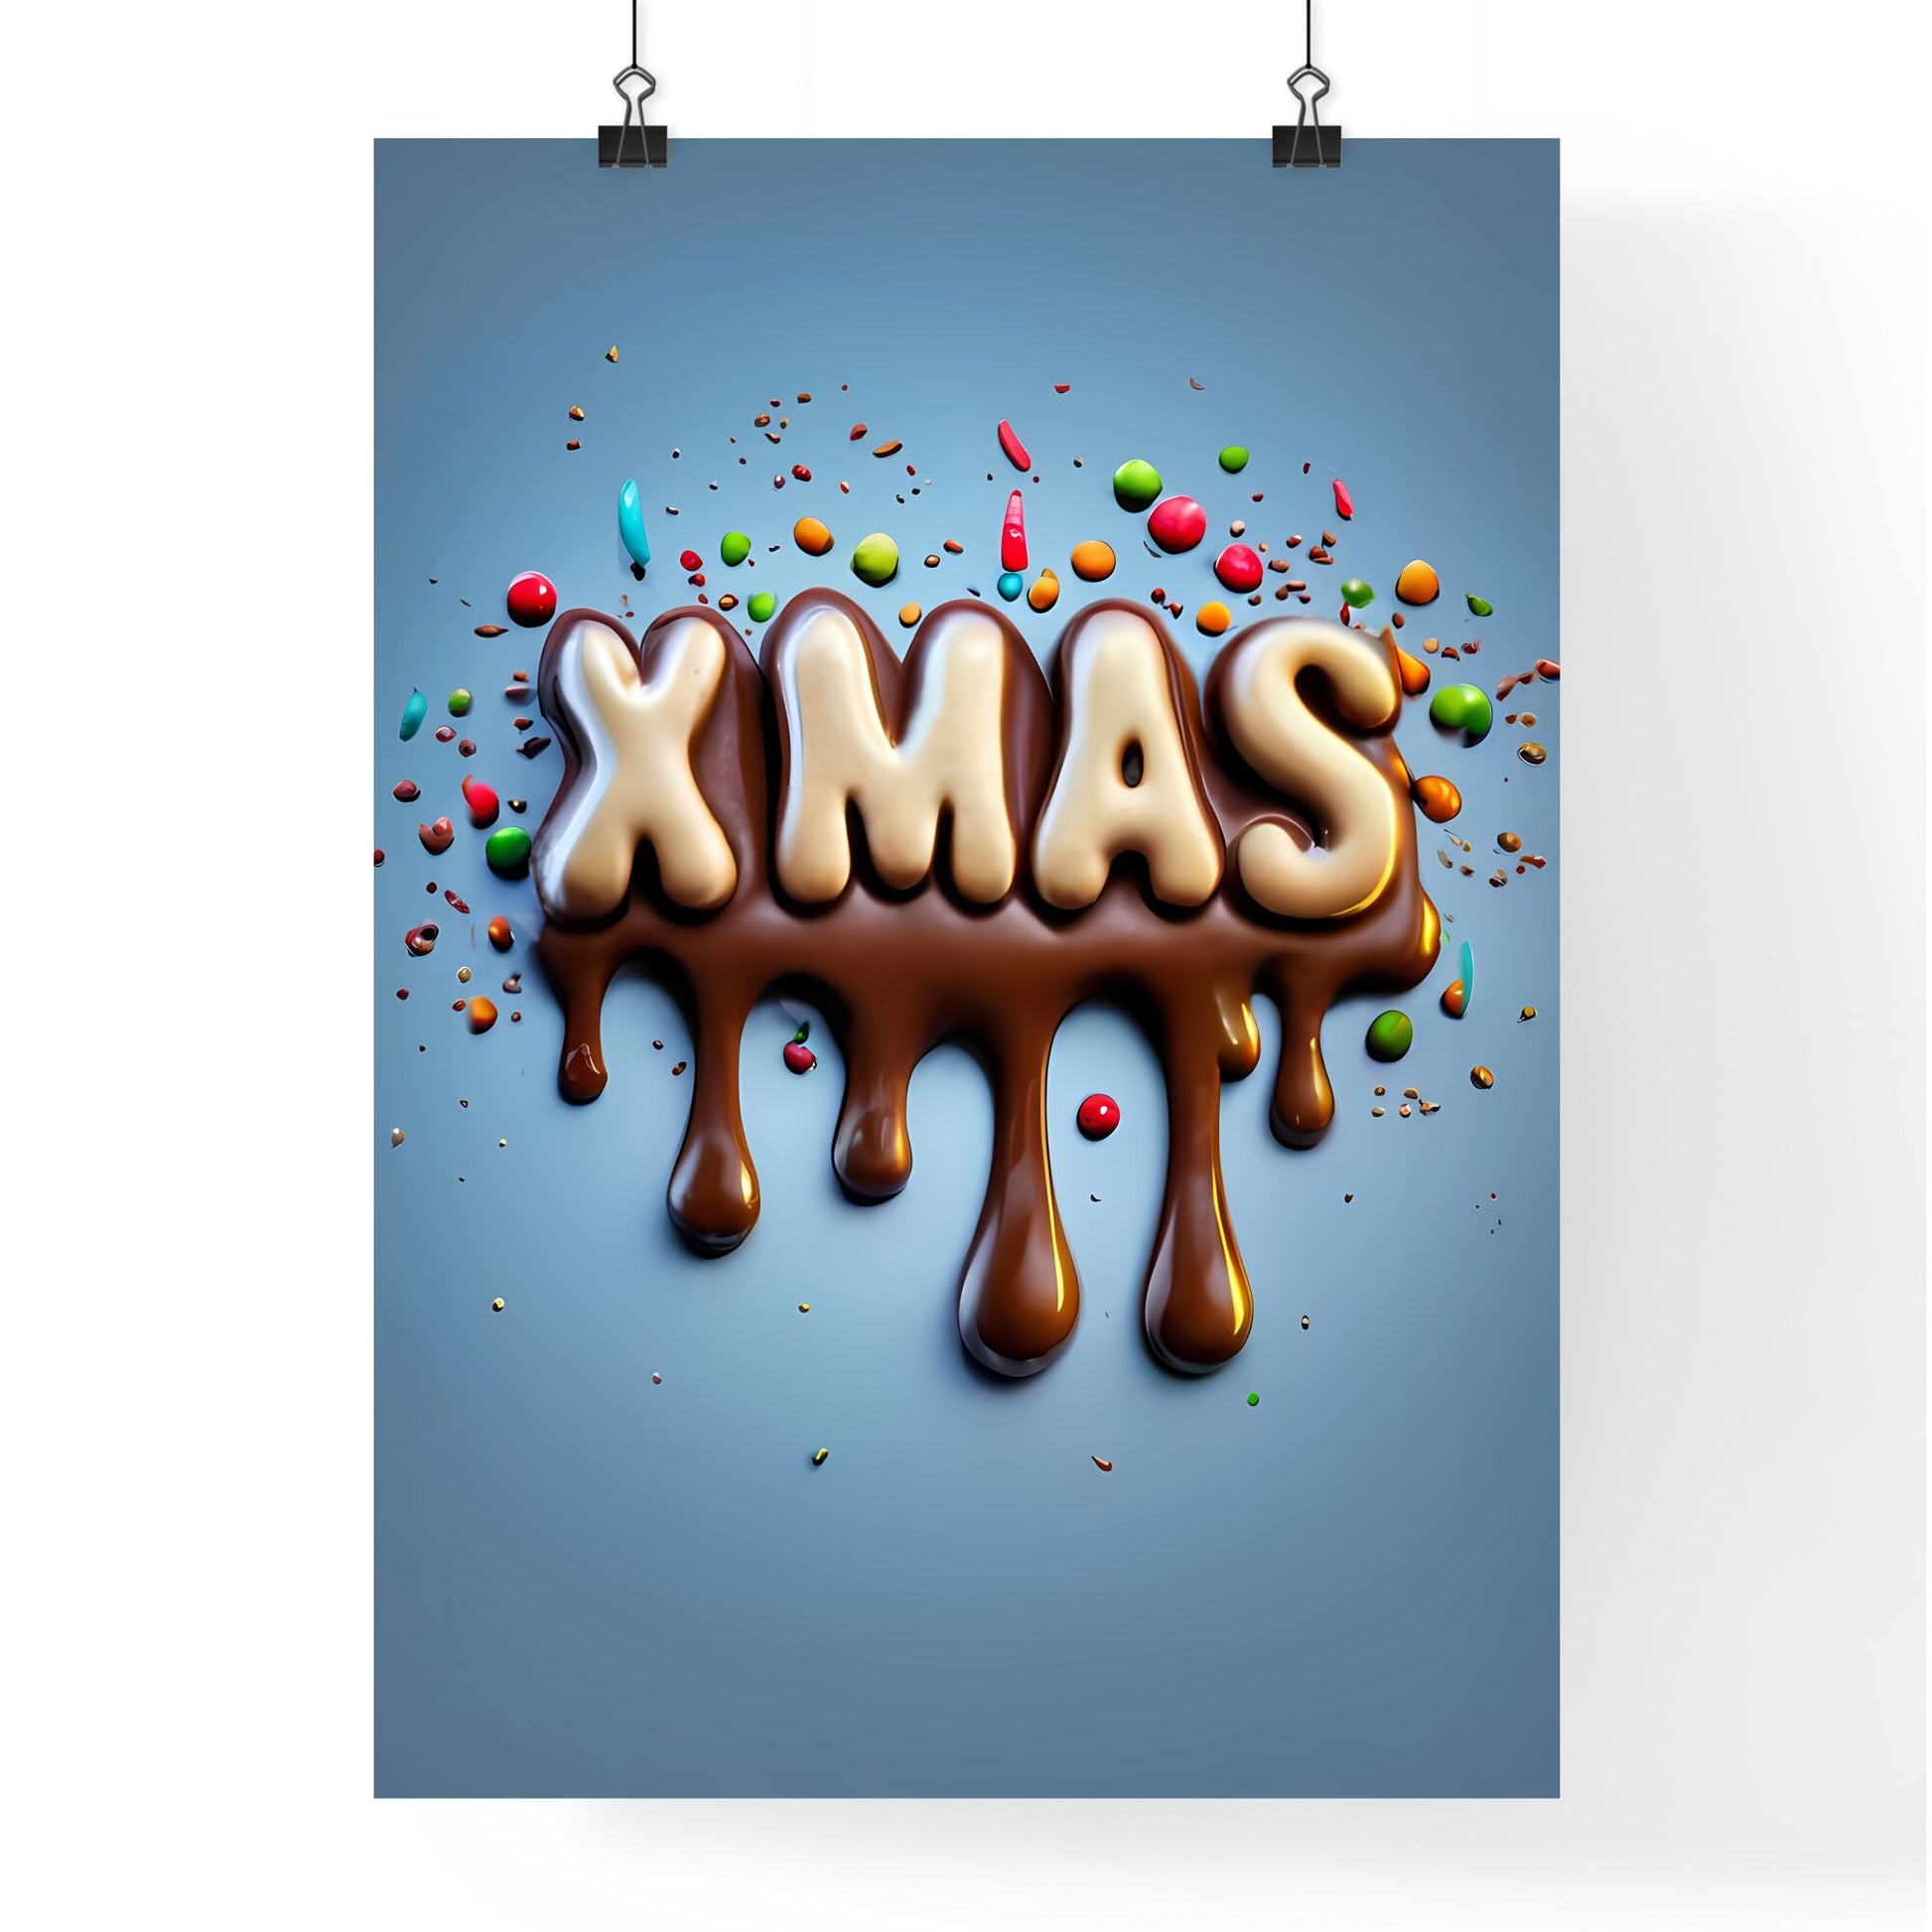 Xmas - A Melted Chocolate With Letters Art Print Default Title